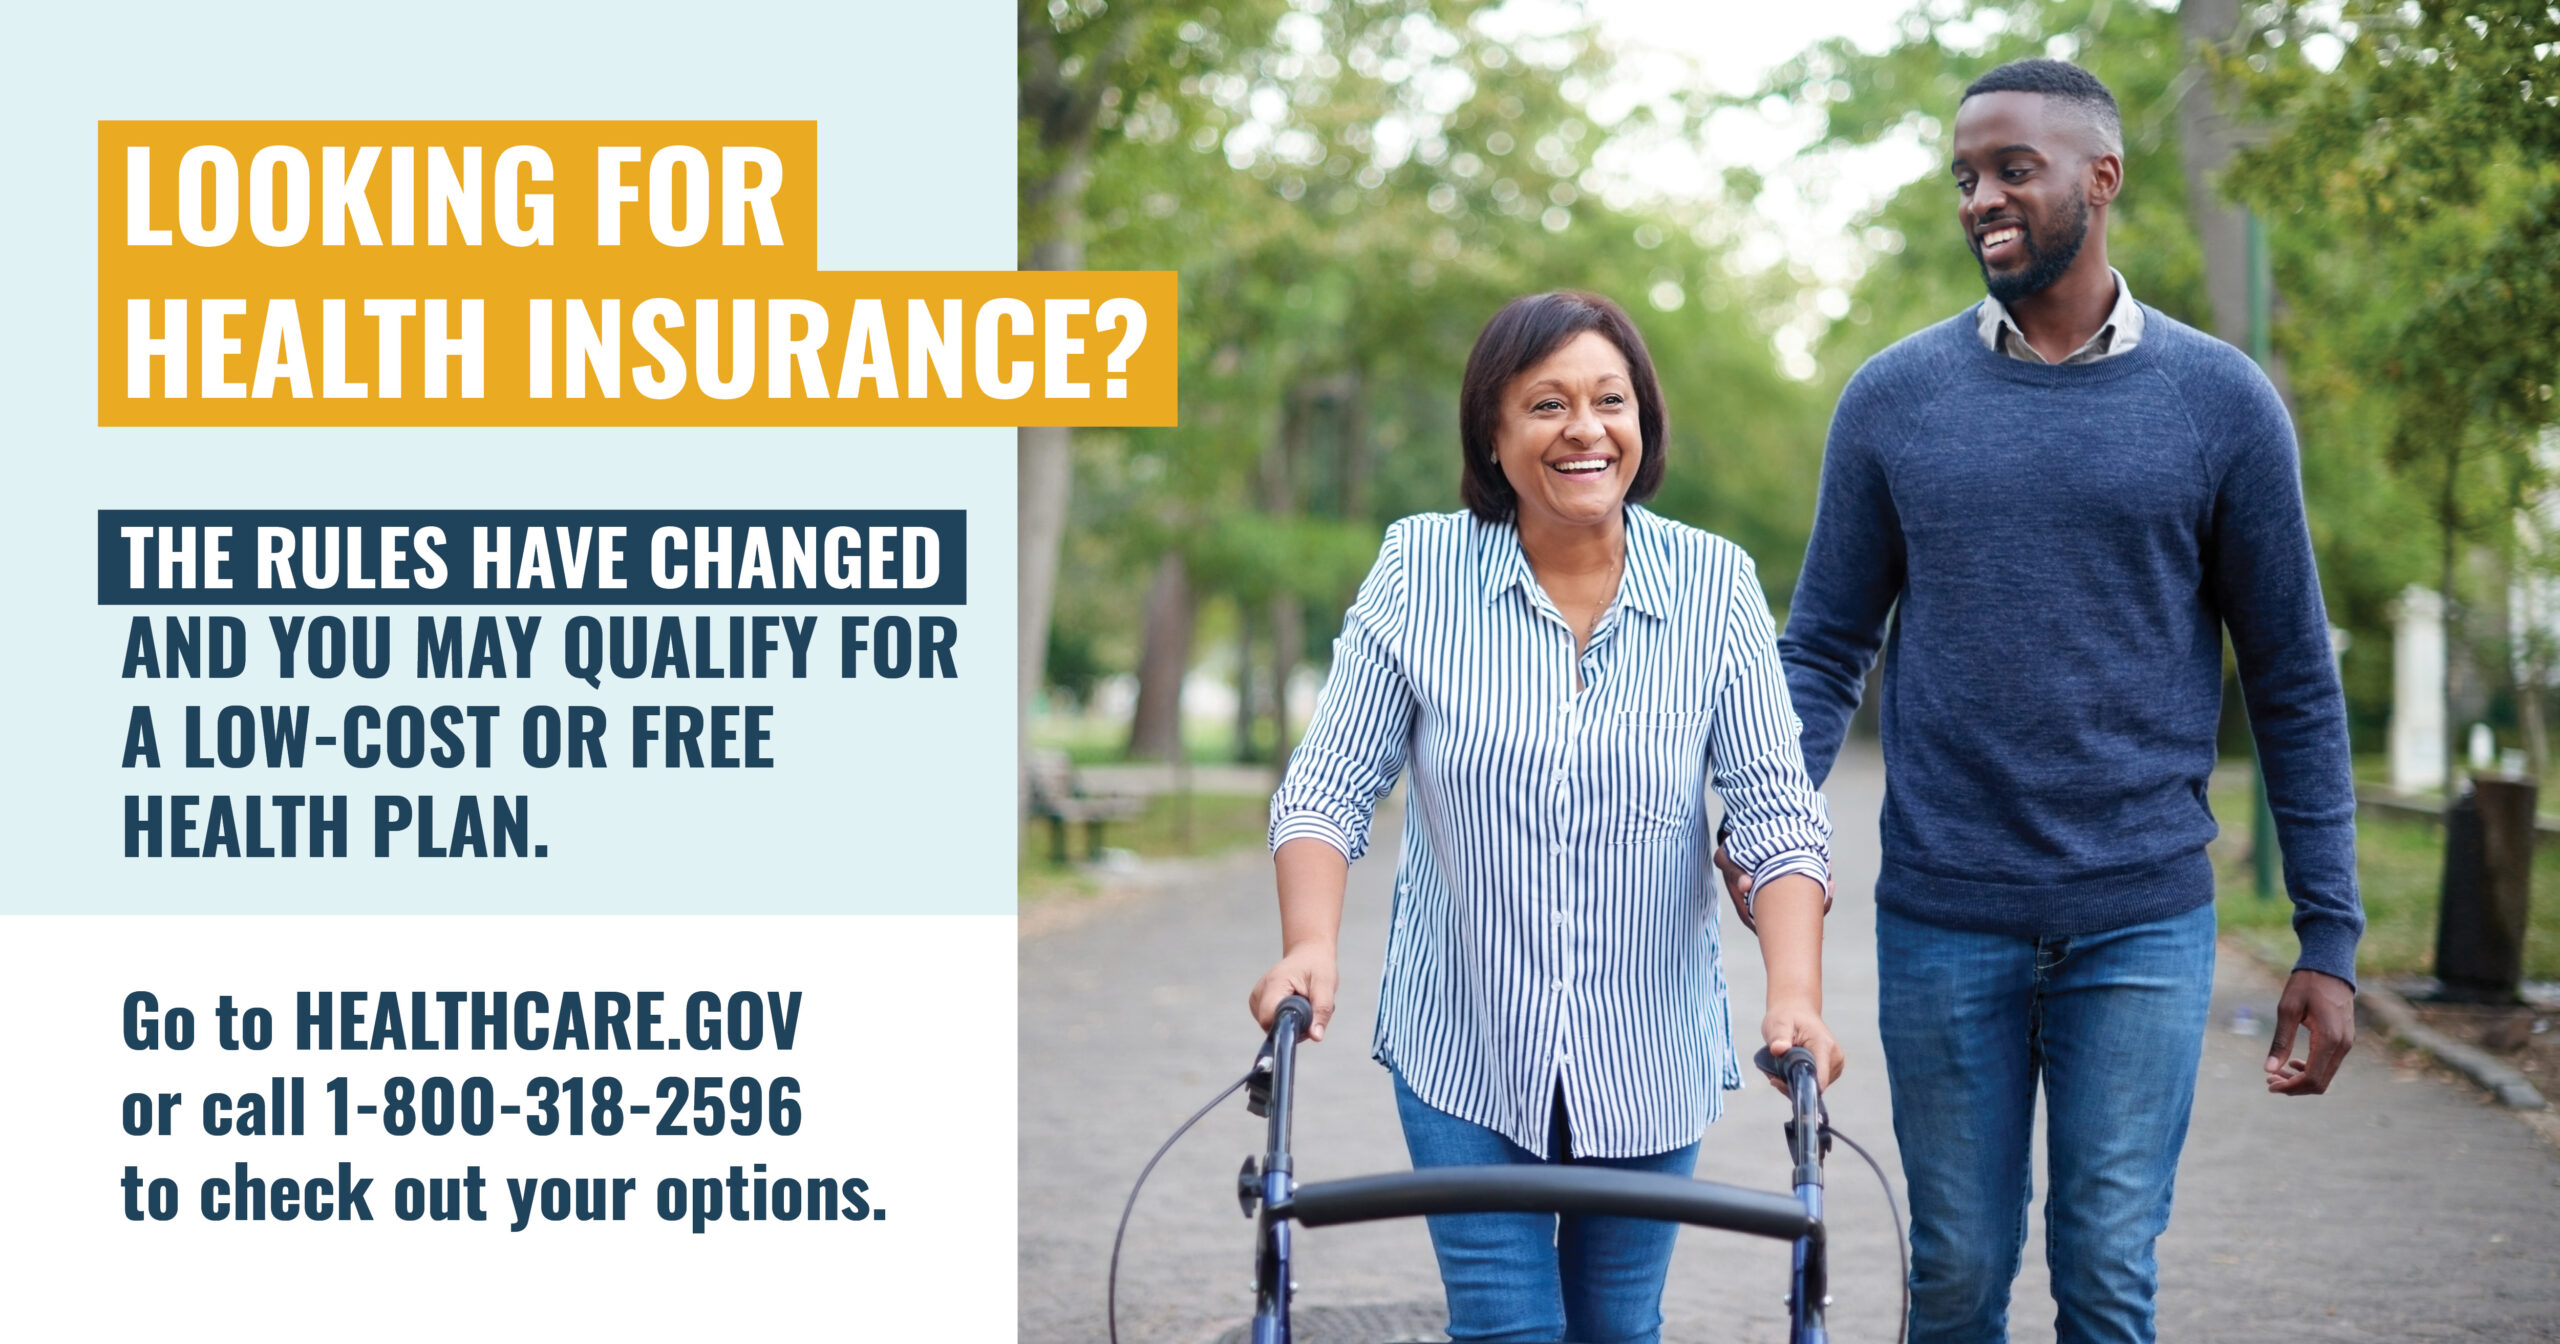 A woman with a walker walking next to a younger man who is assisting her with the message “Looking for health insurance? The rules have changed and you may qualify for a low-cost or free health plan. Go to healthcare.gov or call 1-800-318-2596 to check out your options”.